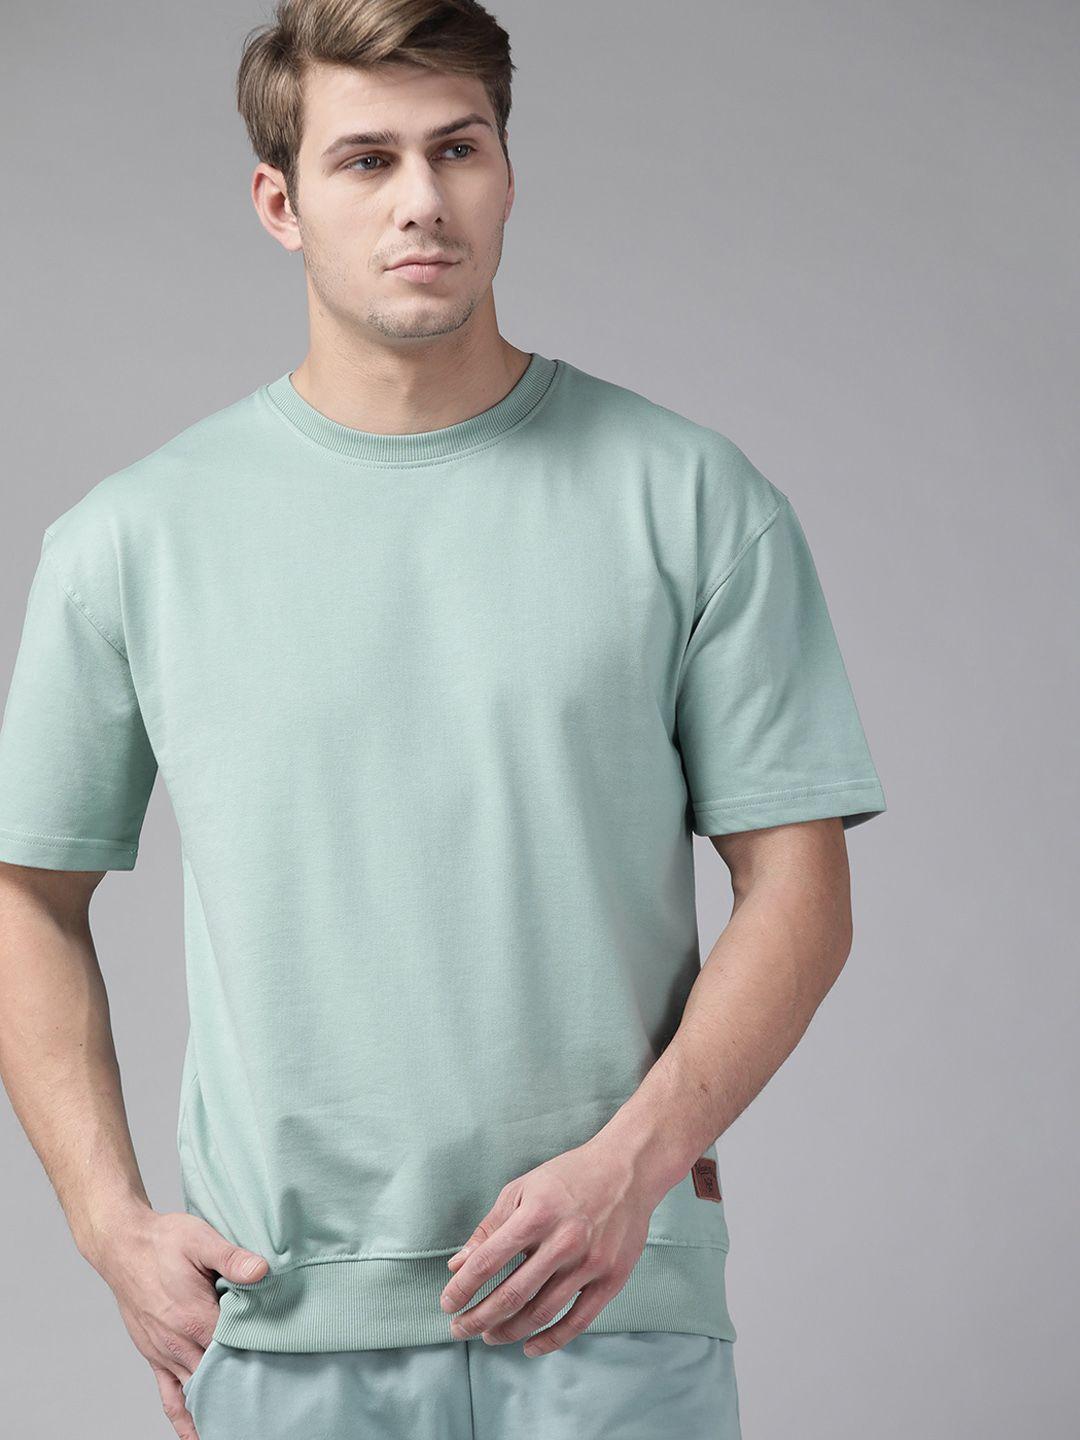 the roadster lifestyle co men green solid relaxed fit sweatshirt